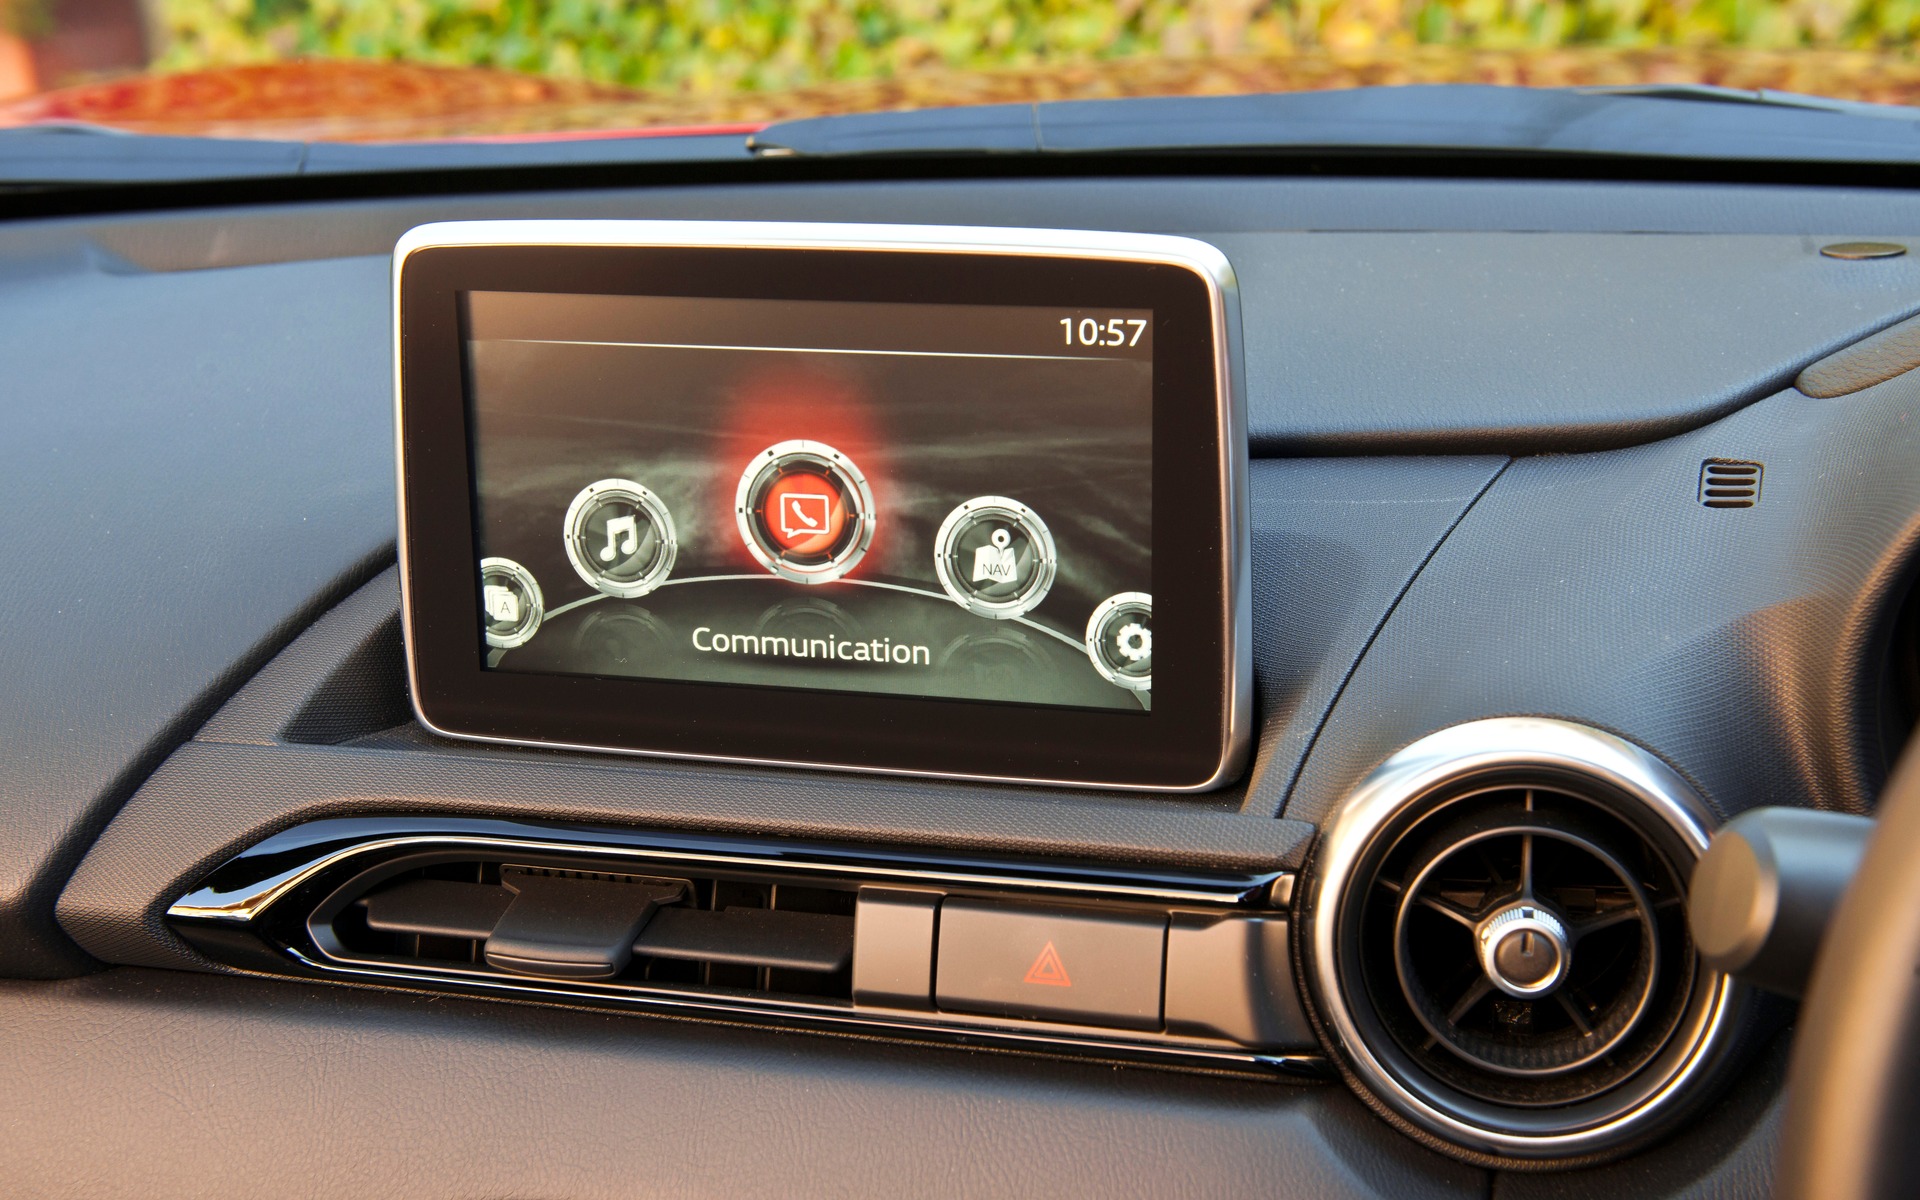 As in the Mazda3, the multimedia screen presides in the middle of the dash.